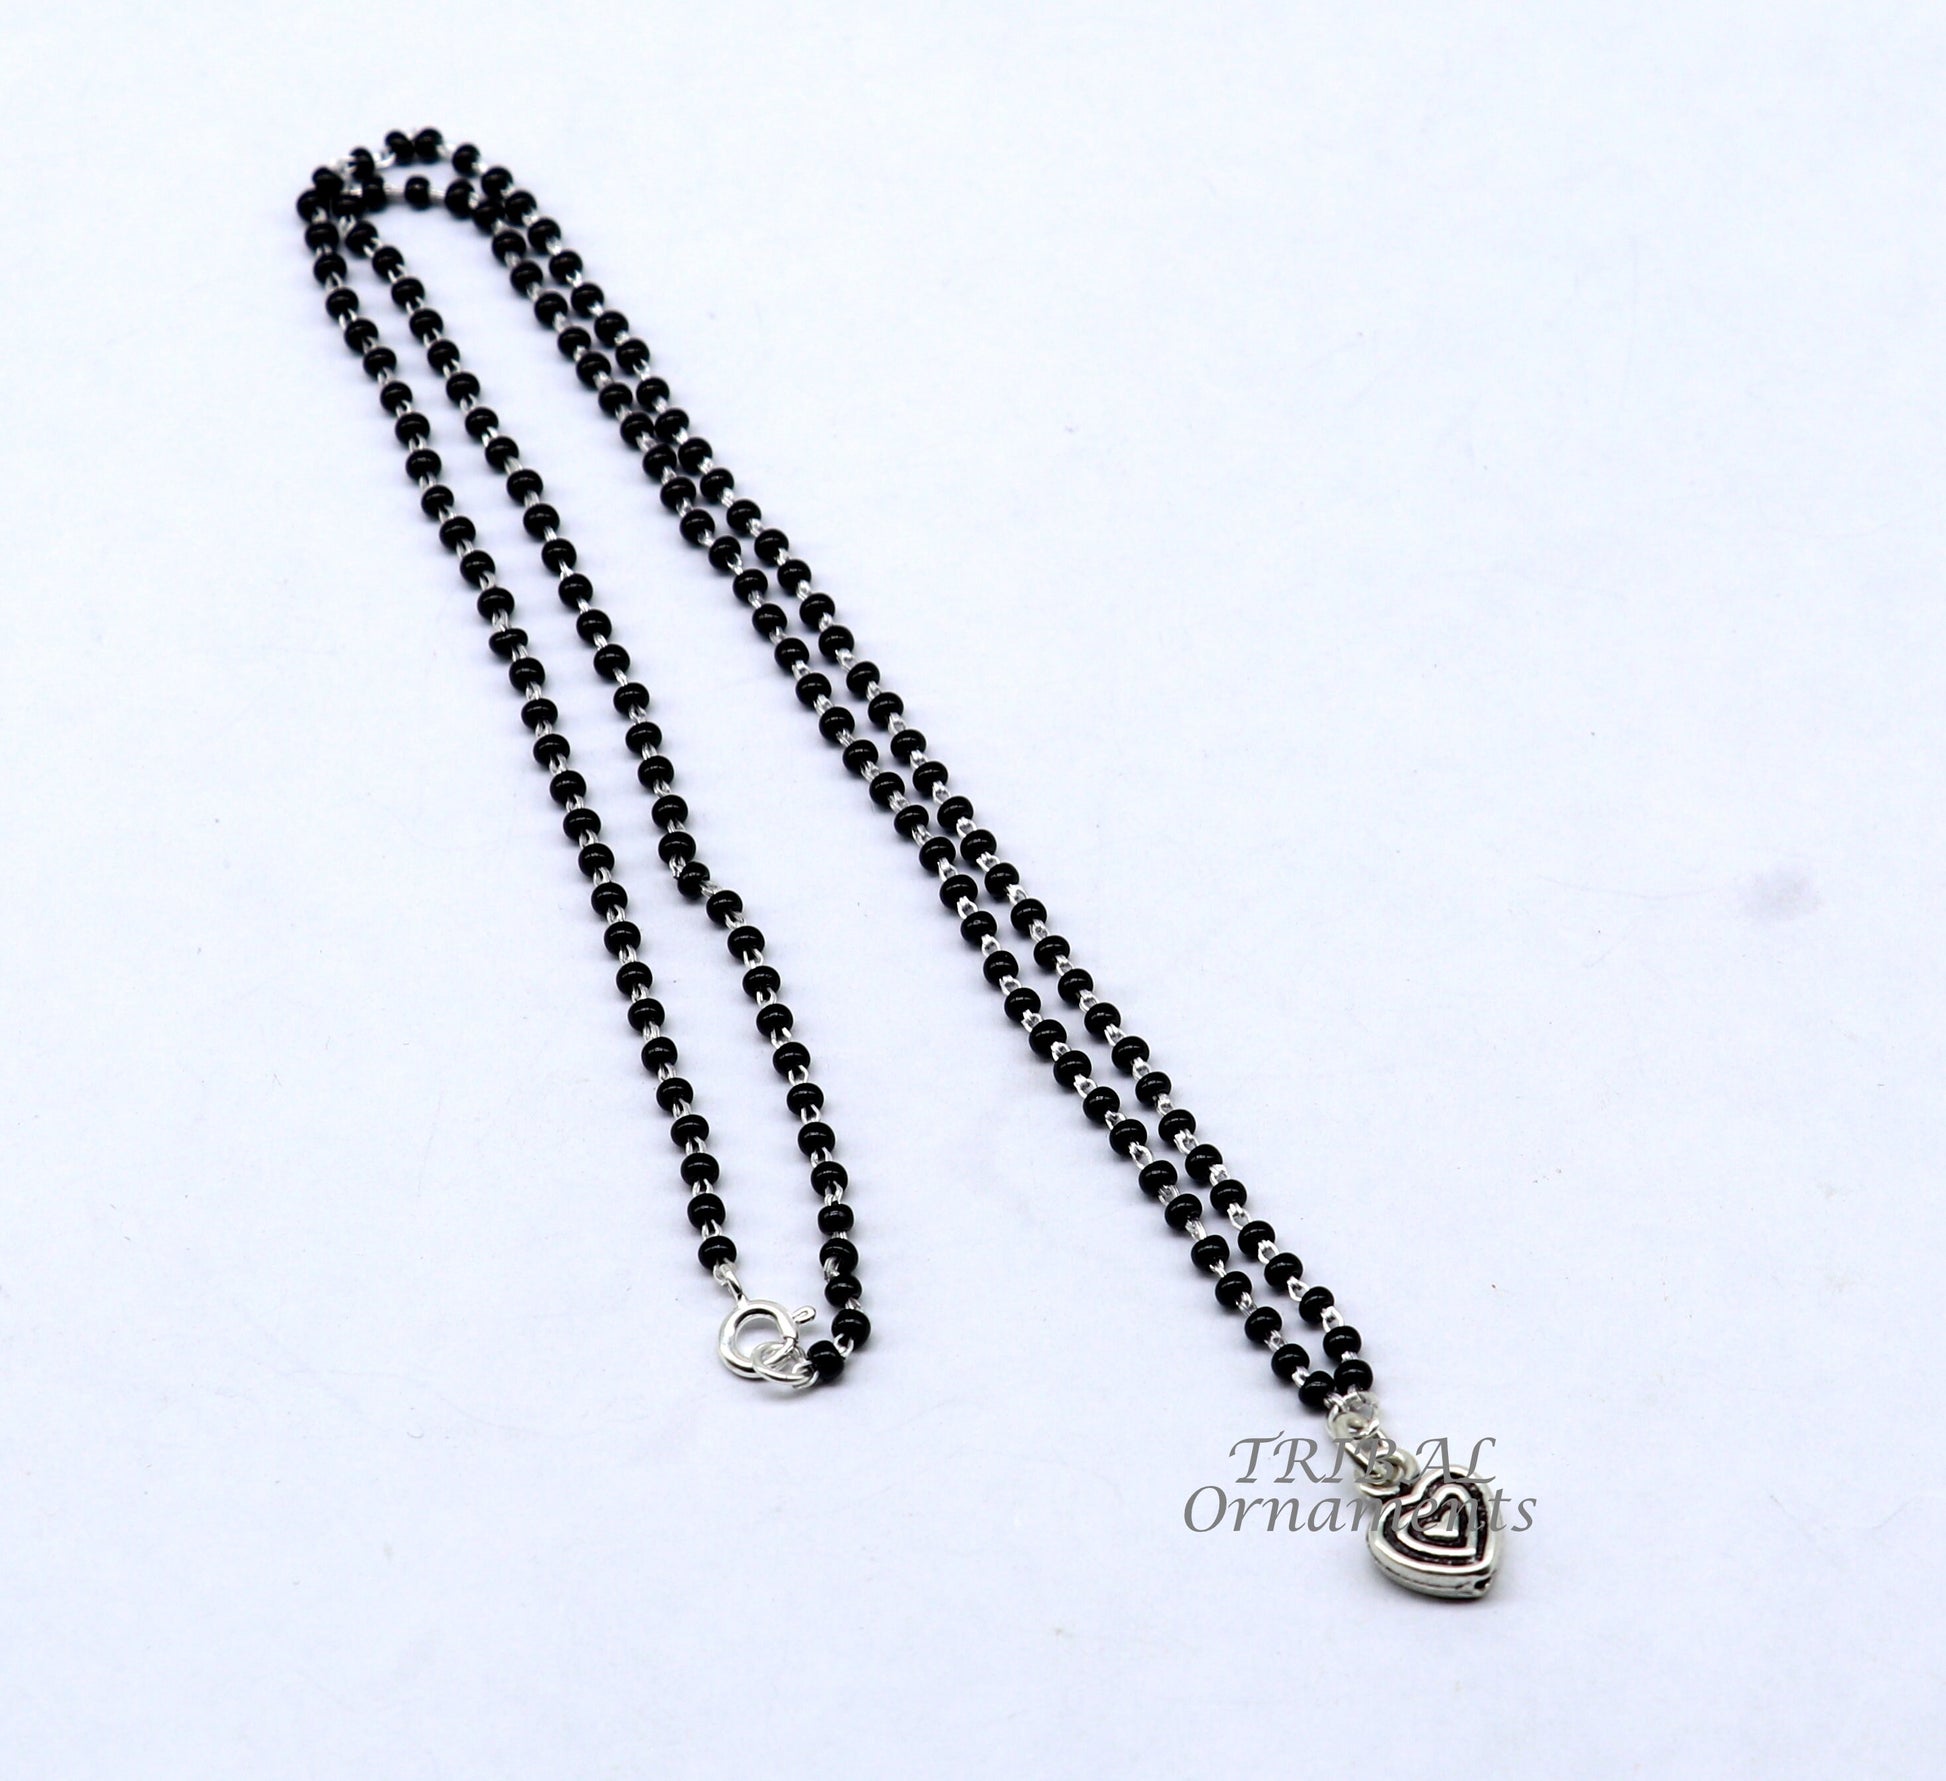 Pure 925 sterling silver black beads chain necklace, vintage Style pendant, traditional style brides Mangalsutra necklace set502 - TRIBAL ORNAMENTS